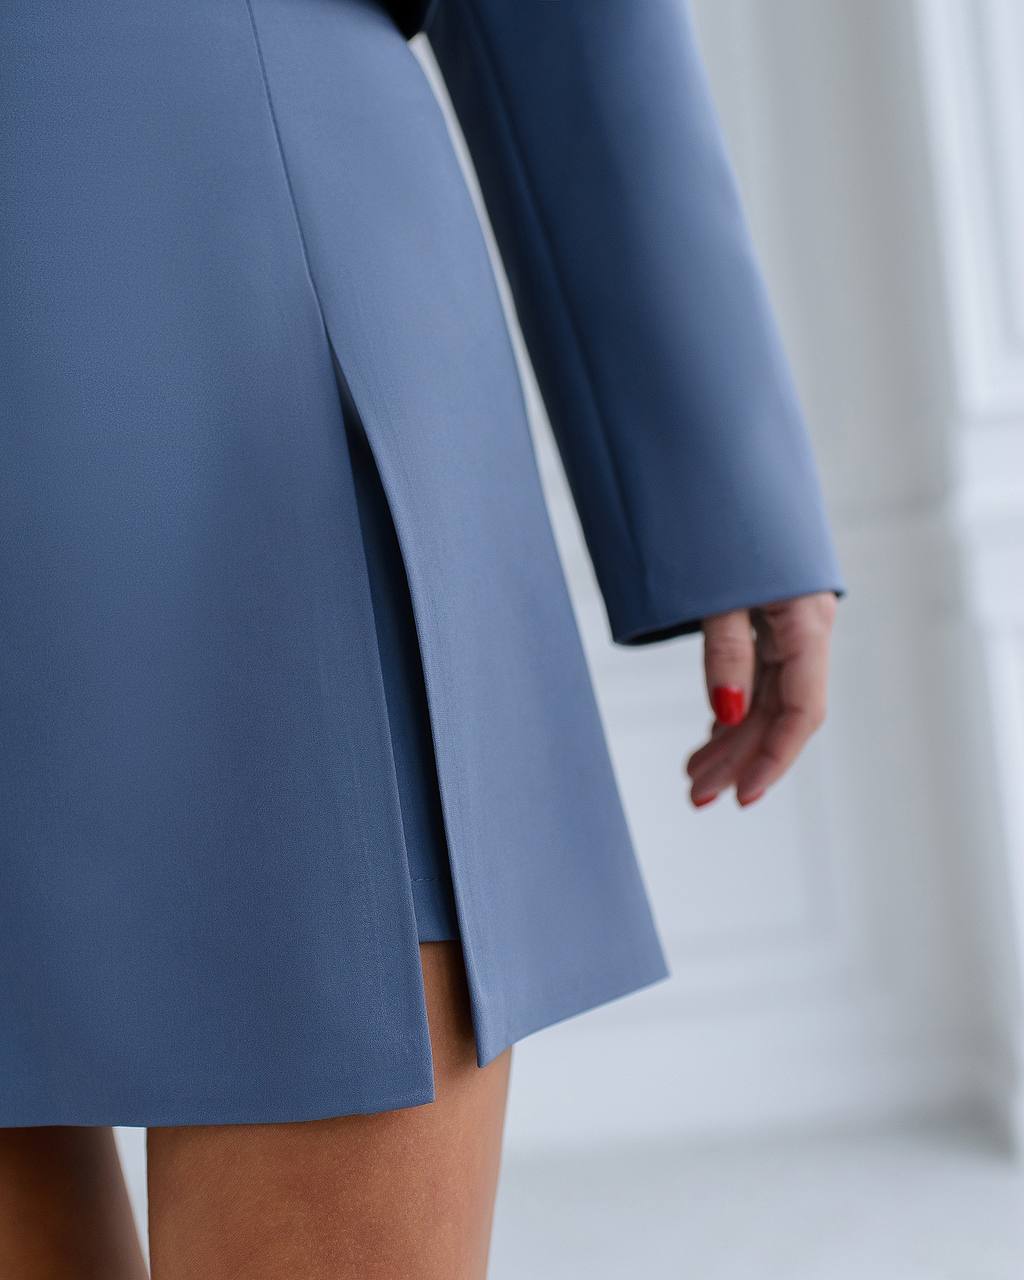 a close up of a person wearing a blue skirt